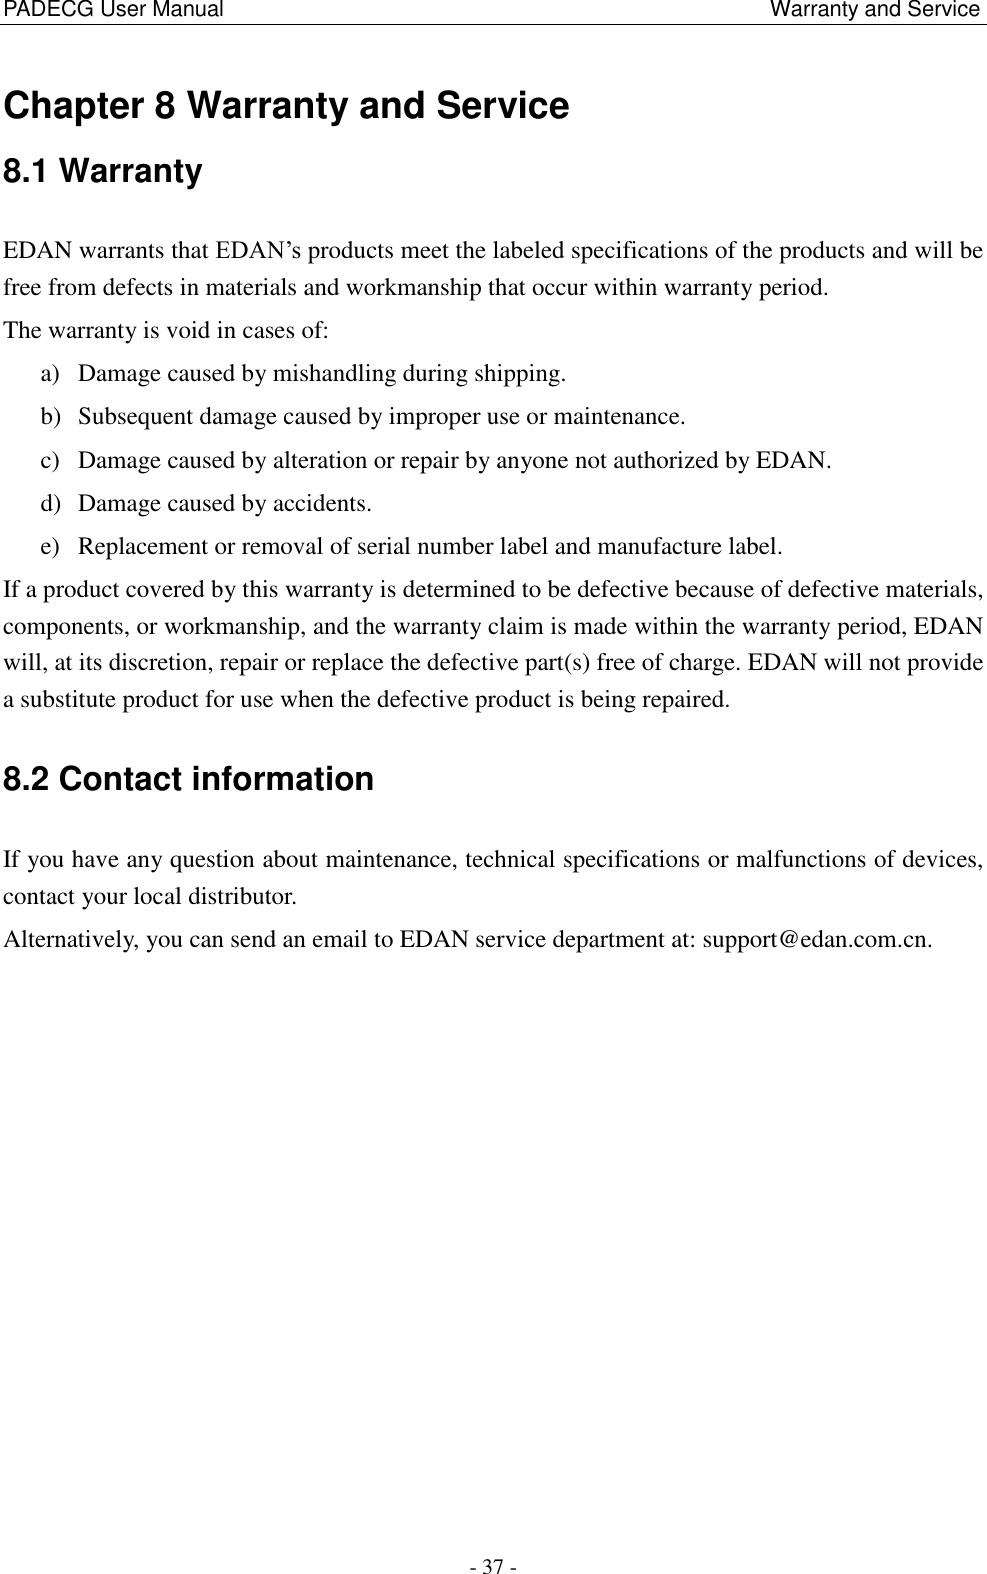 PADECG User Manual                                                                                                    Warranty and Service - 37 - Chapter 8 Warranty and Service 8.1 Warranty EDAN warrants that EDAN’s products meet the labeled specifications of the products and will be free from defects in materials and workmanship that occur within warranty period. The warranty is void in cases of: a) Damage caused by mishandling during shipping. b) Subsequent damage caused by improper use or maintenance. c) Damage caused by alteration or repair by anyone not authorized by EDAN. d) Damage caused by accidents. e) Replacement or removal of serial number label and manufacture label. If a product covered by this warranty is determined to be defective because of defective materials, components, or workmanship, and the warranty claim is made within the warranty period, EDAN will, at its discretion, repair or replace the defective part(s) free of charge. EDAN will not provide a substitute product for use when the defective product is being repaired. 8.2 Contact information If you have any question about maintenance, technical specifications or malfunctions of devices, contact your local distributor. Alternatively, you can send an email to EDAN service department at: support@edan.com.cn.  